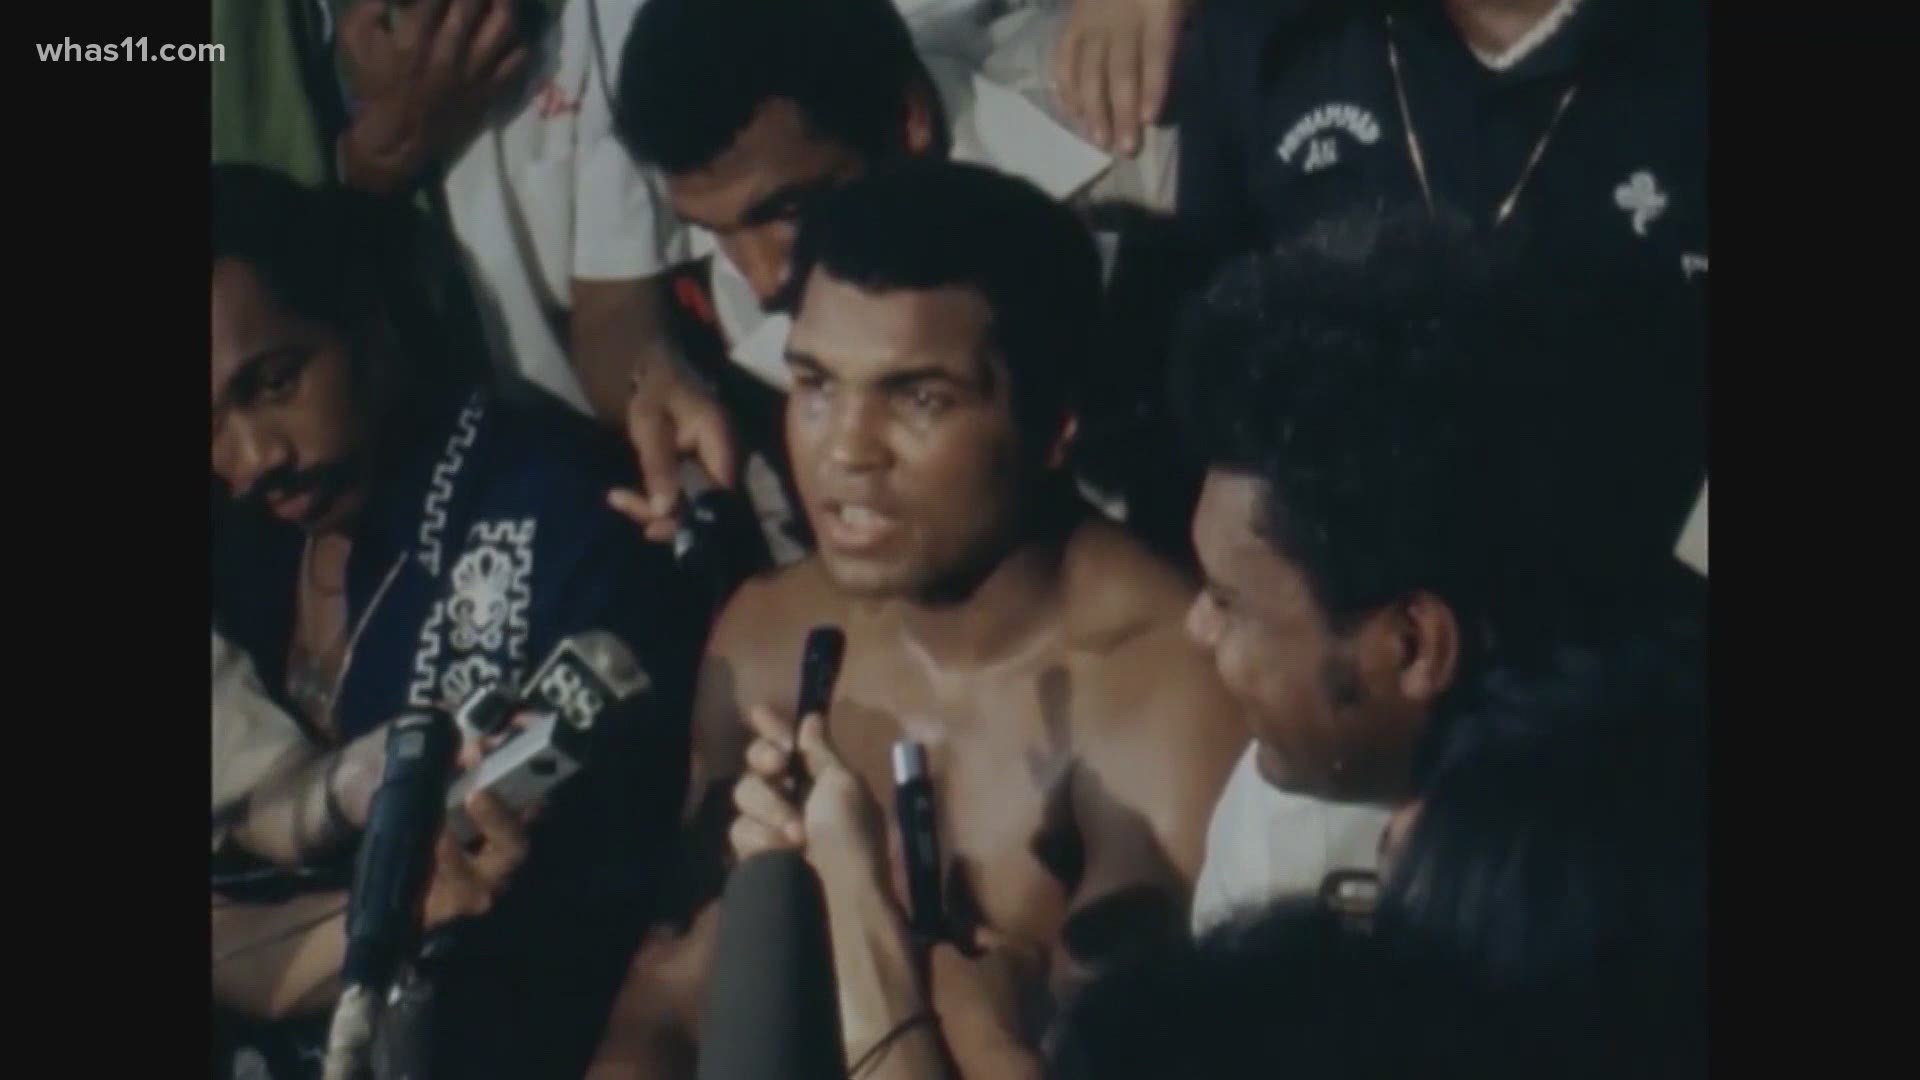 People far and near are remembering Muhammad Ali 5 years after his death.